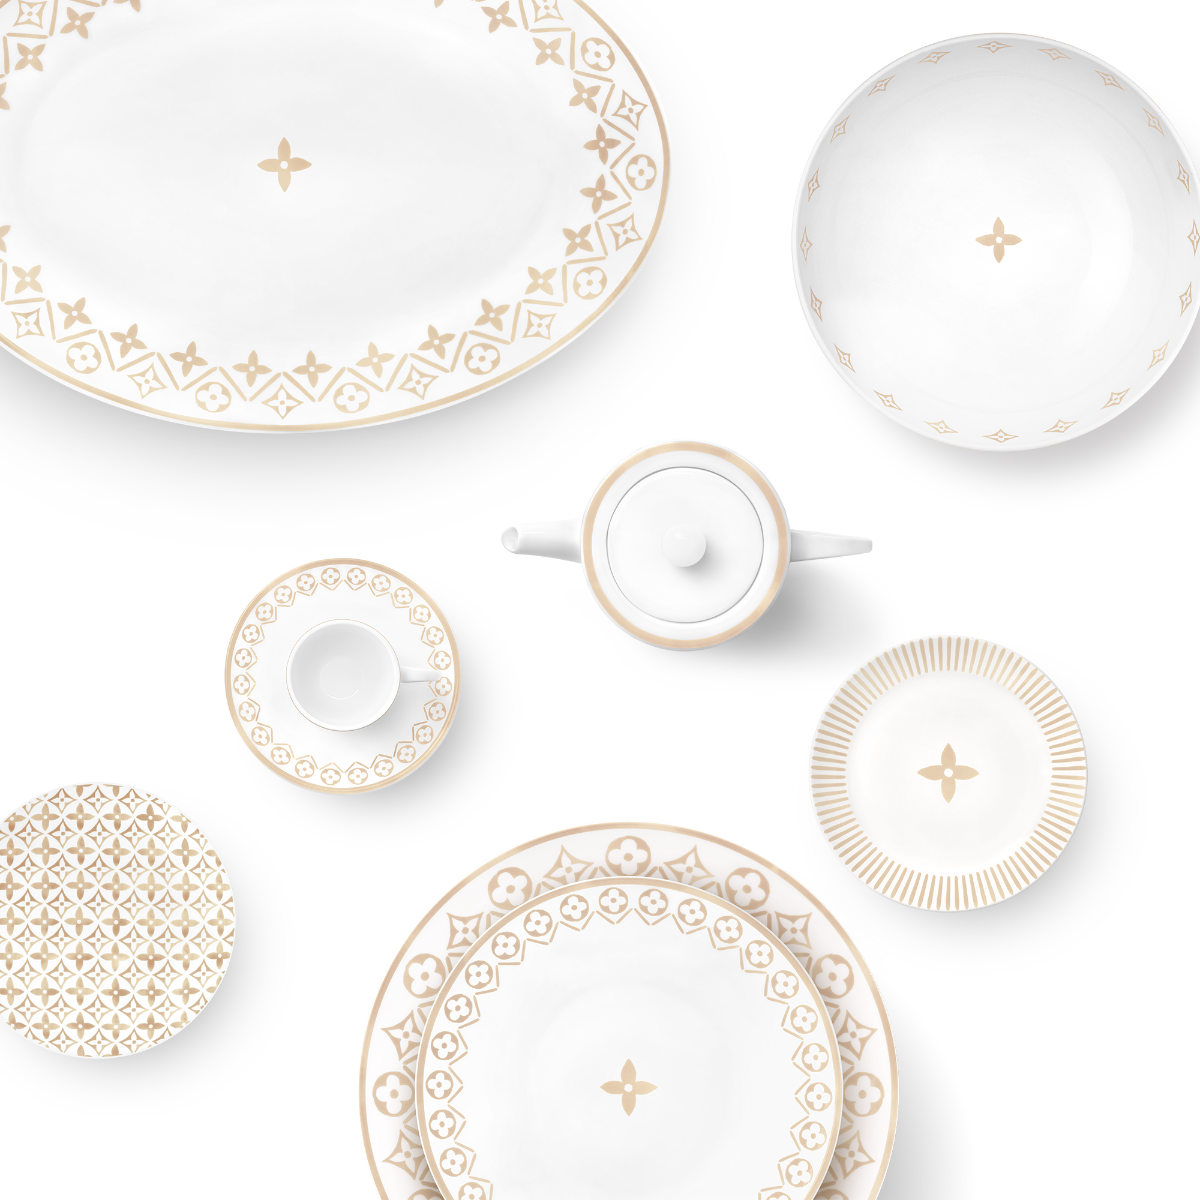 Louis Vuitton Reveals Its New Tableware Collection